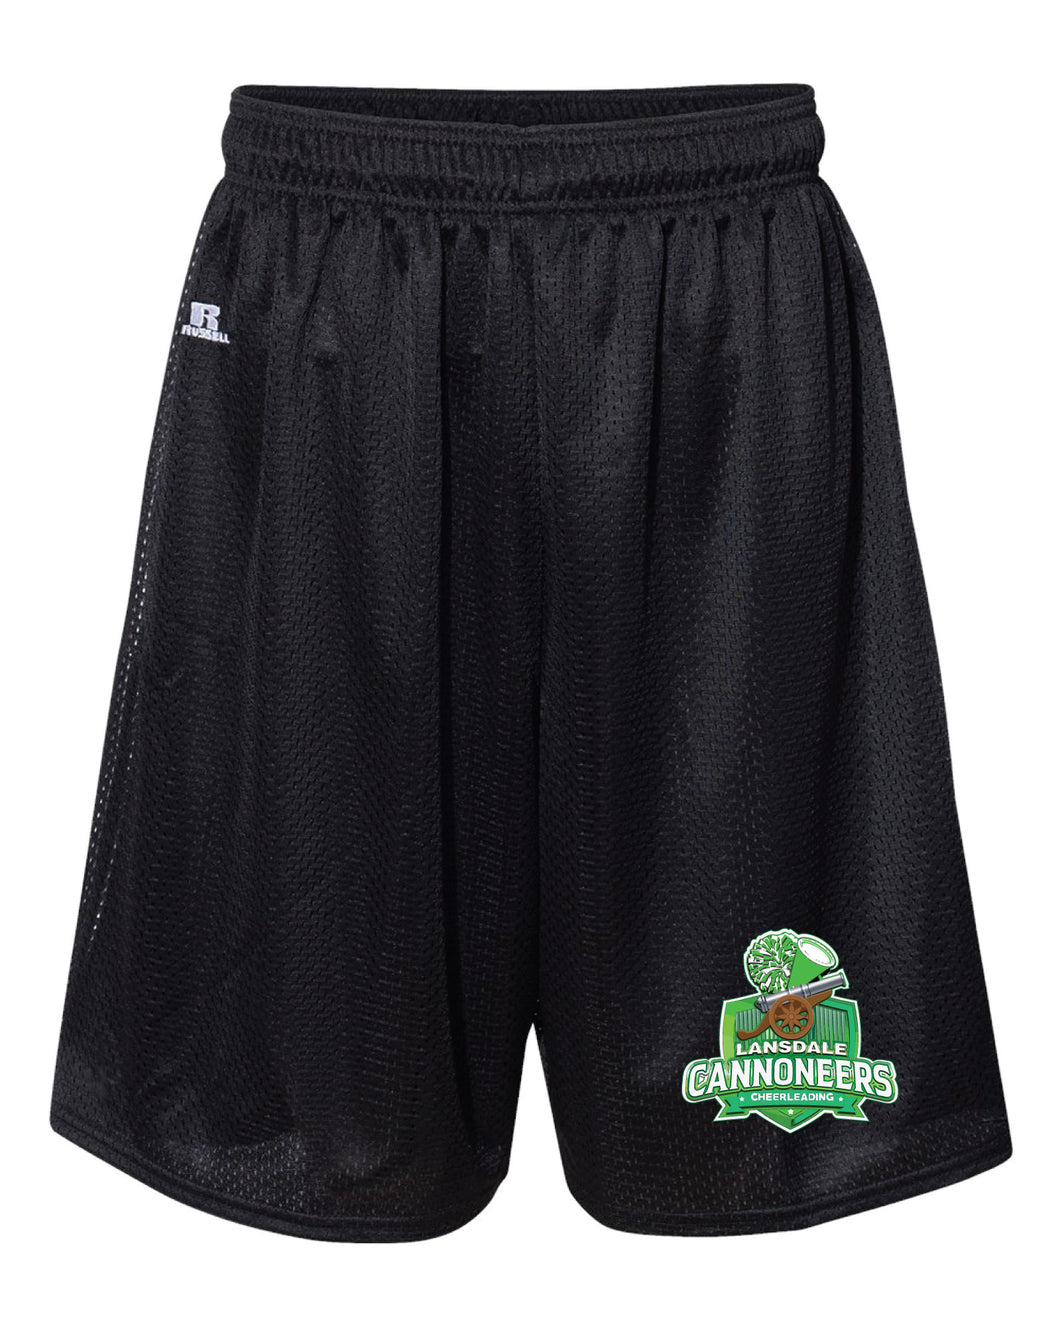 Cannoneers Cheer Russell Athletic Tech Shorts - Black - 5KounT2018